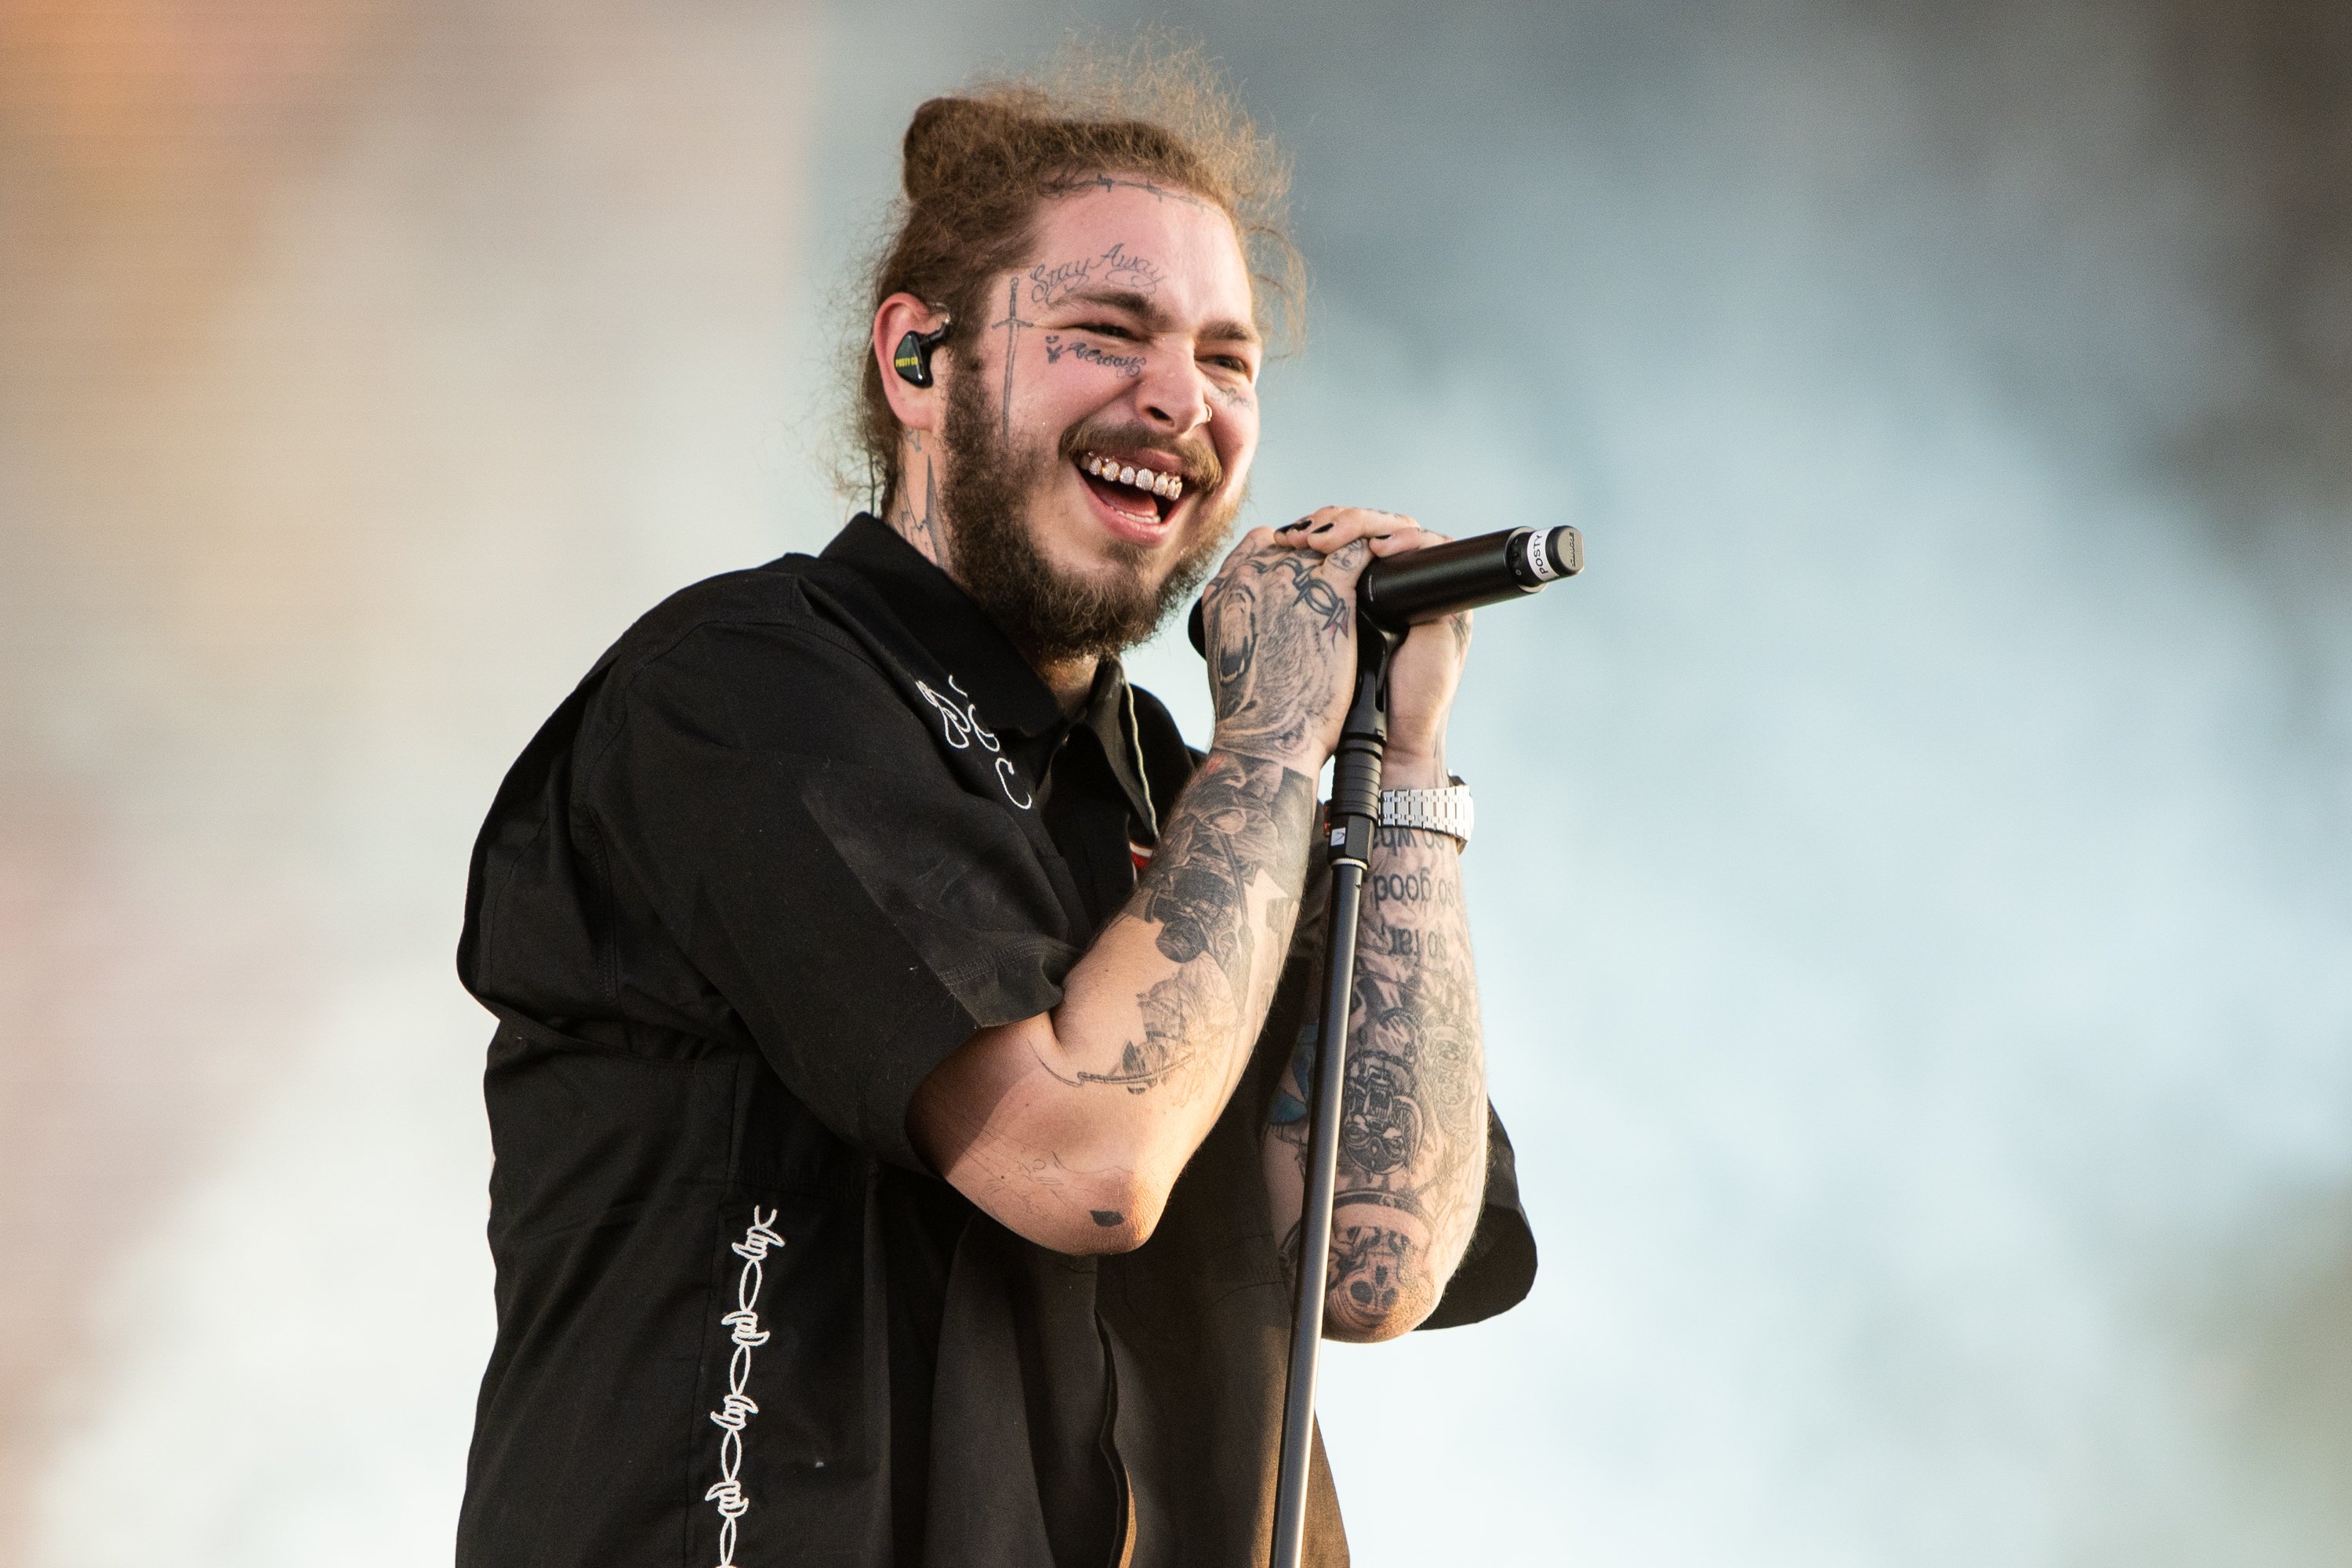 Post Malone performs during Wireless Festival 2018 at Finsbury Park on July 6th, 2018 in London, England. | Source: Getty Images